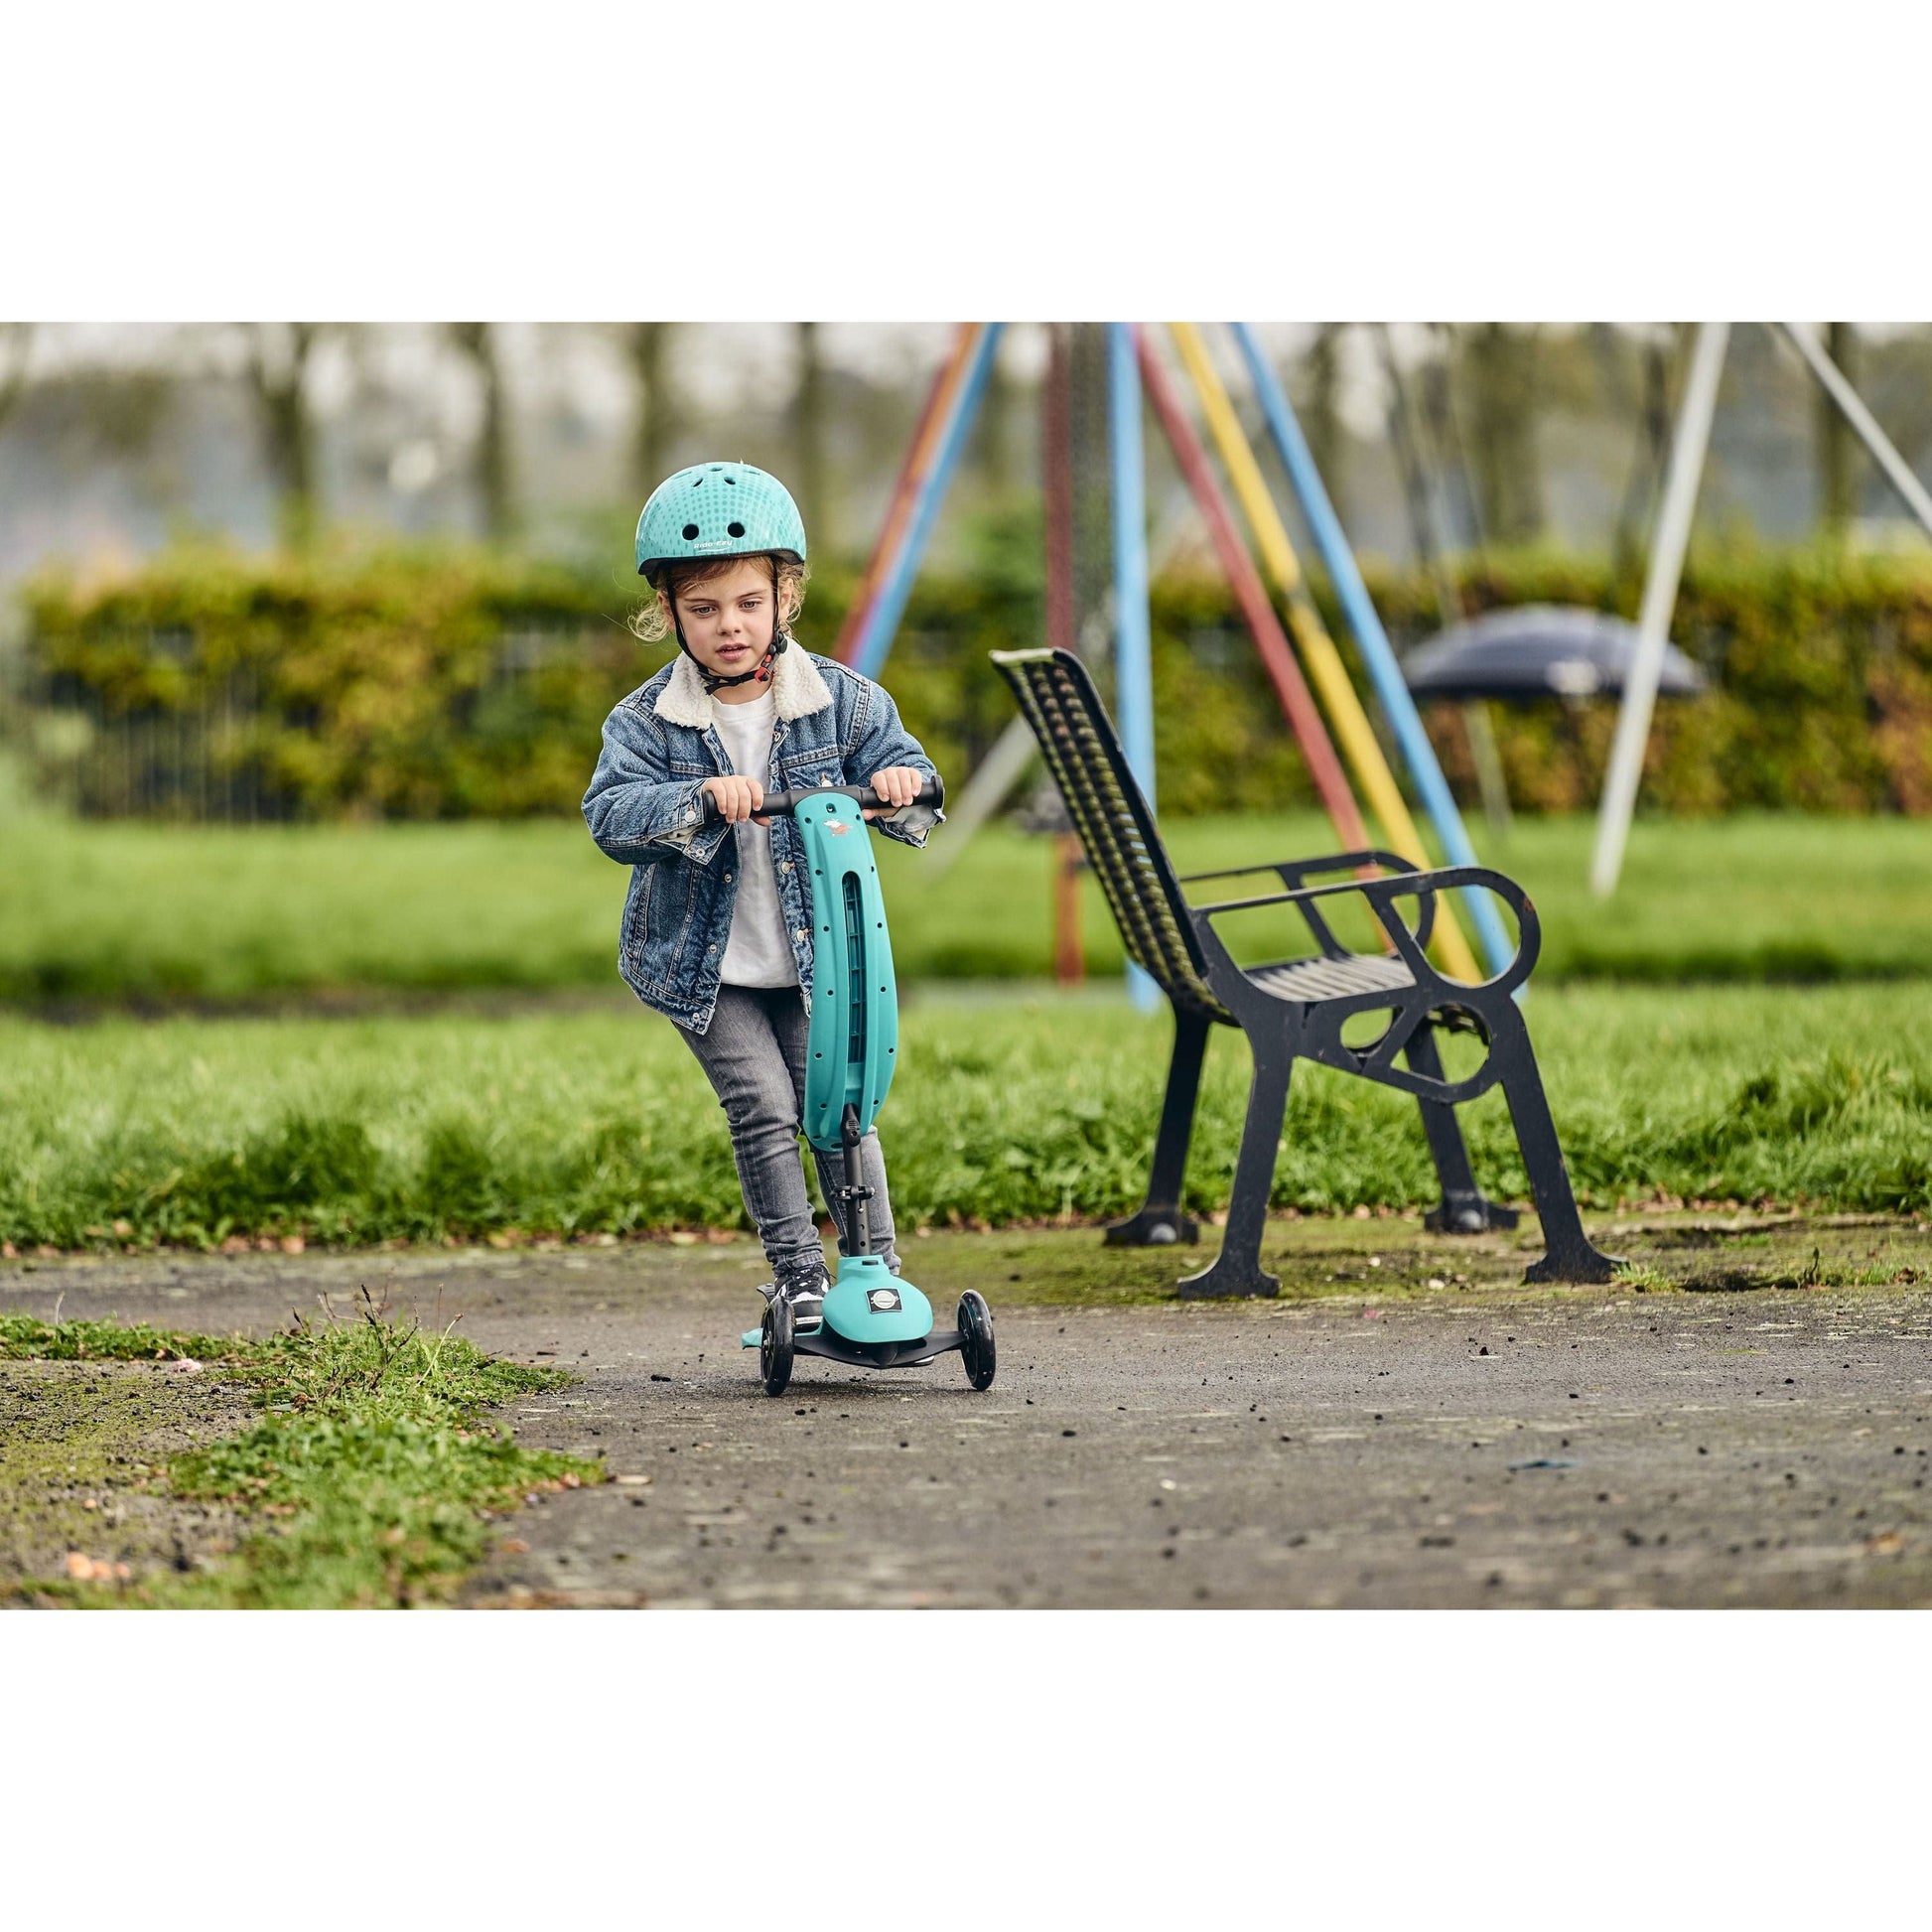 child riding Ride-Ezy Kick & Go Scooter - Woodland Green near swings in park